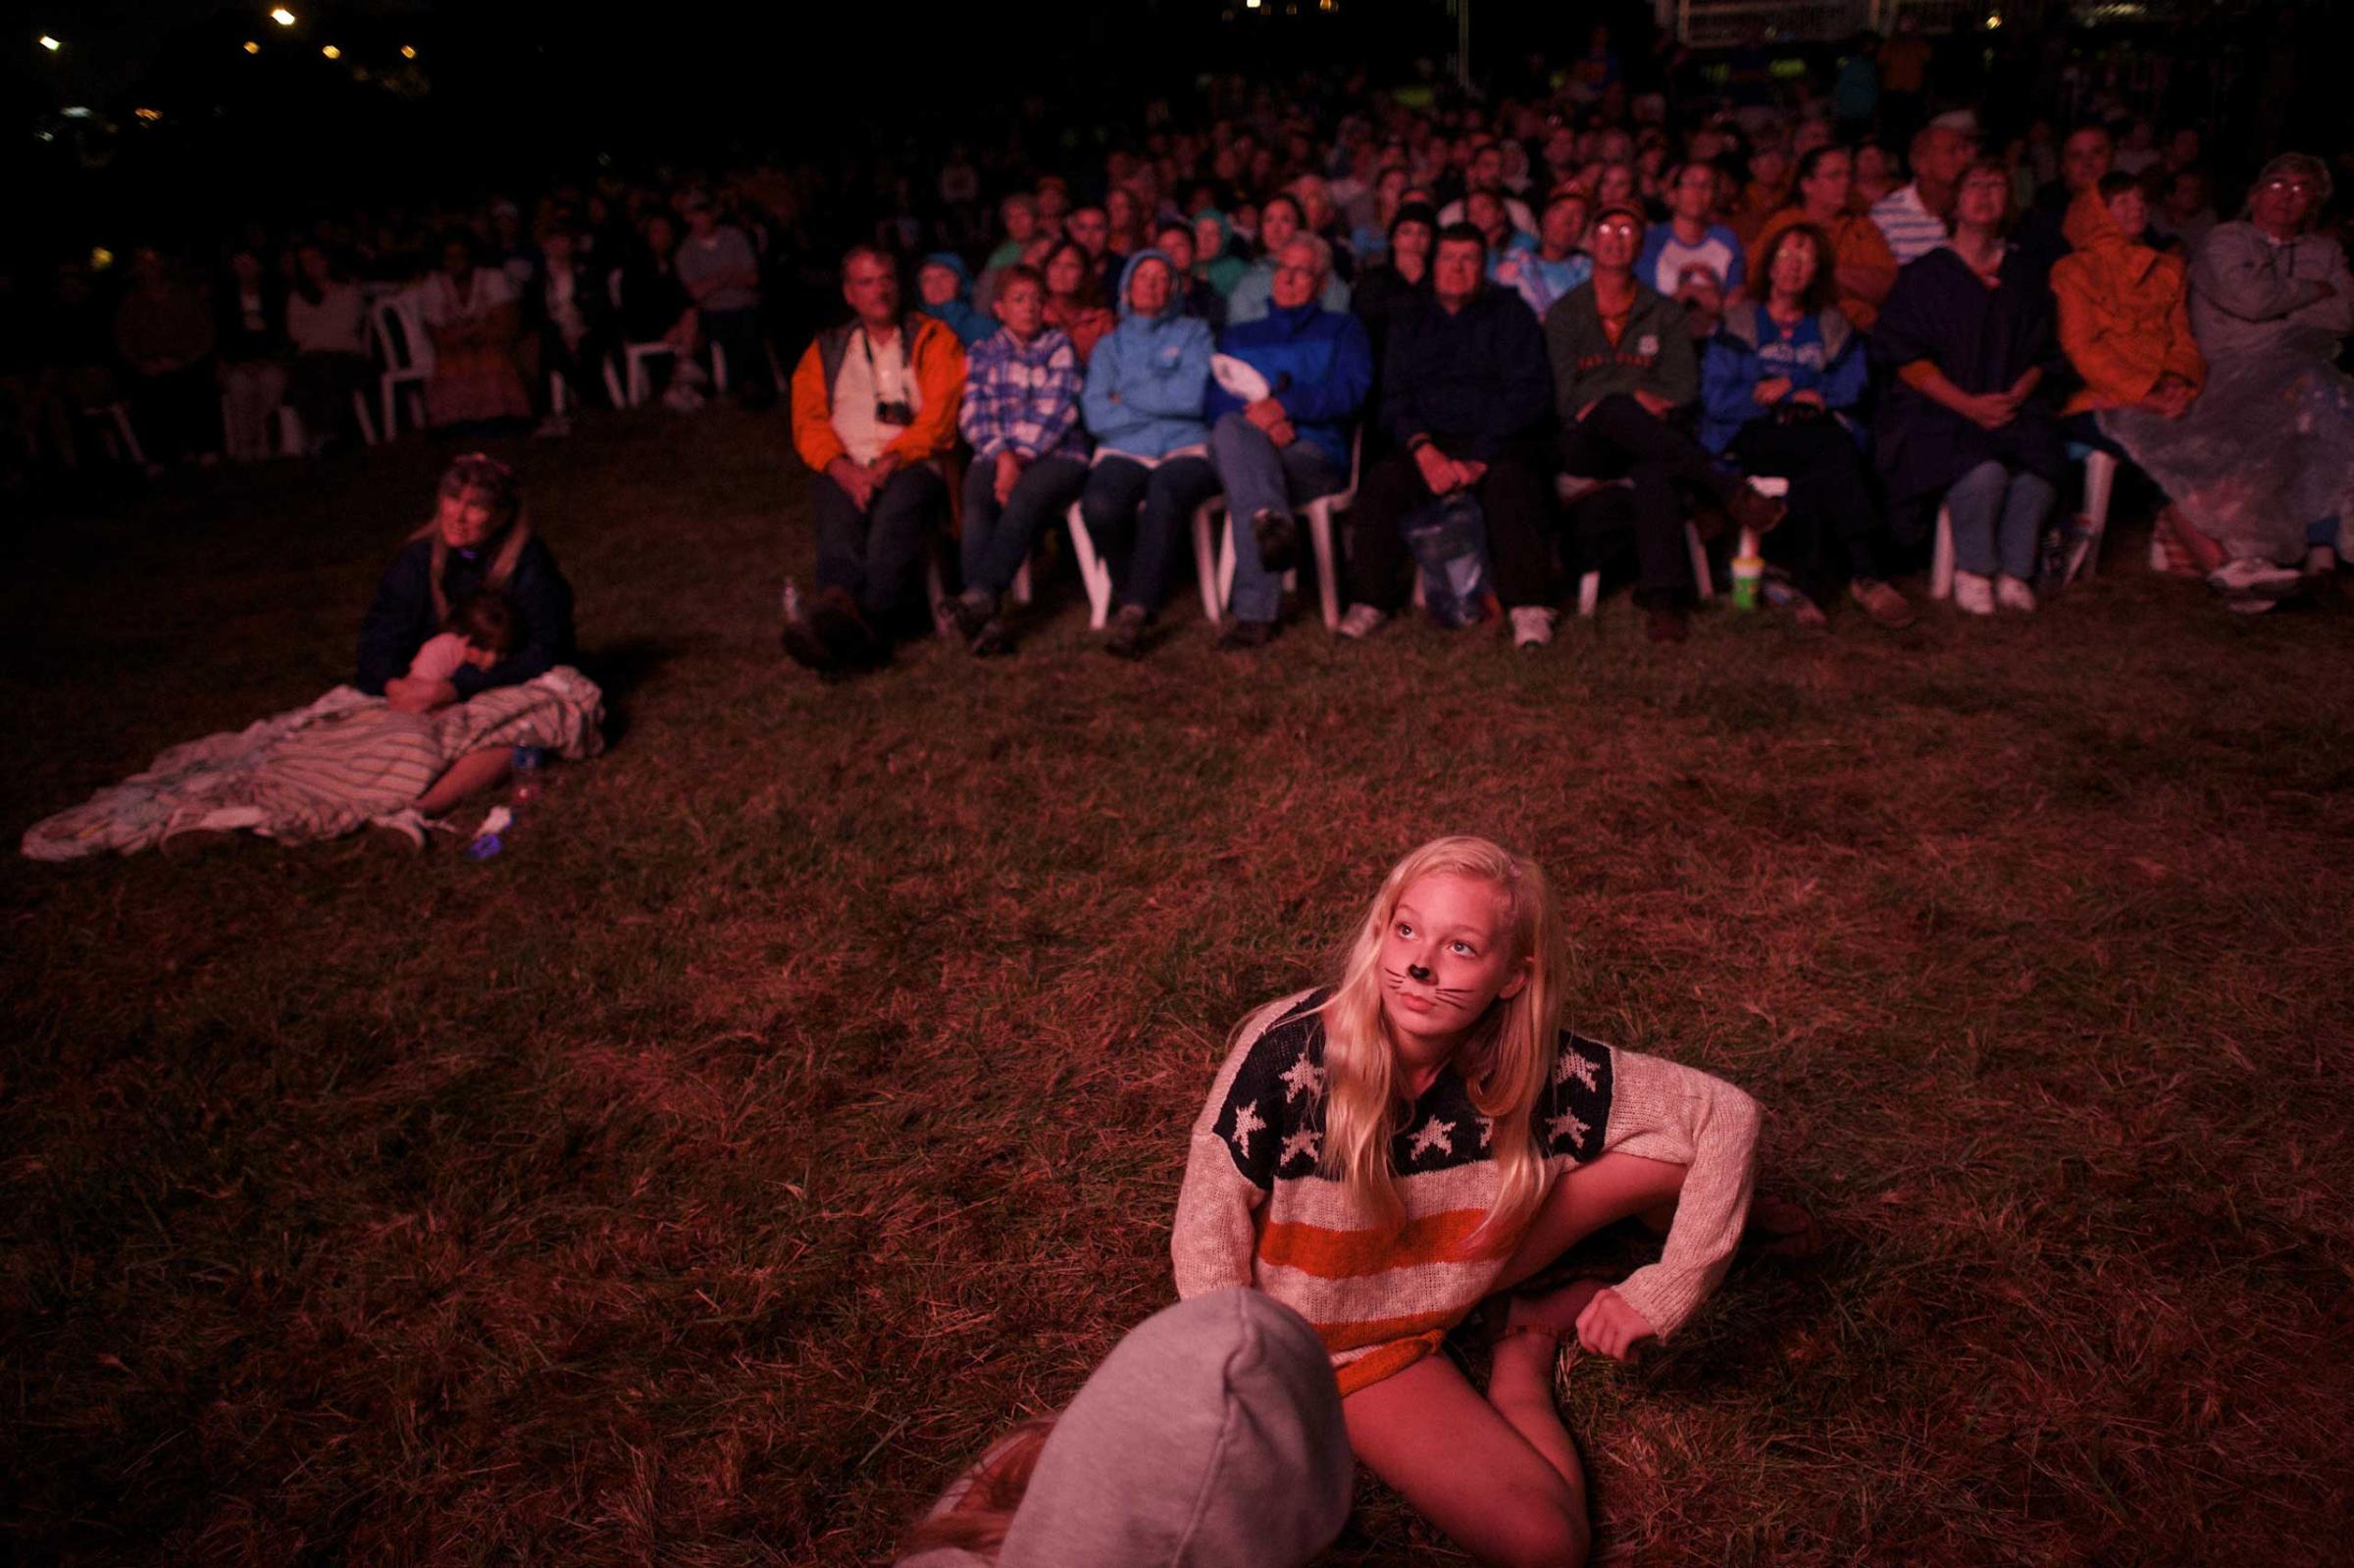 A girl watches a monitor during a during a fireworks display commemorating the bicentennial of the writing of The Star-Spangled Banner at Fort McHenry National Historic Park on Sept. 13, 2014 in Baltimore.